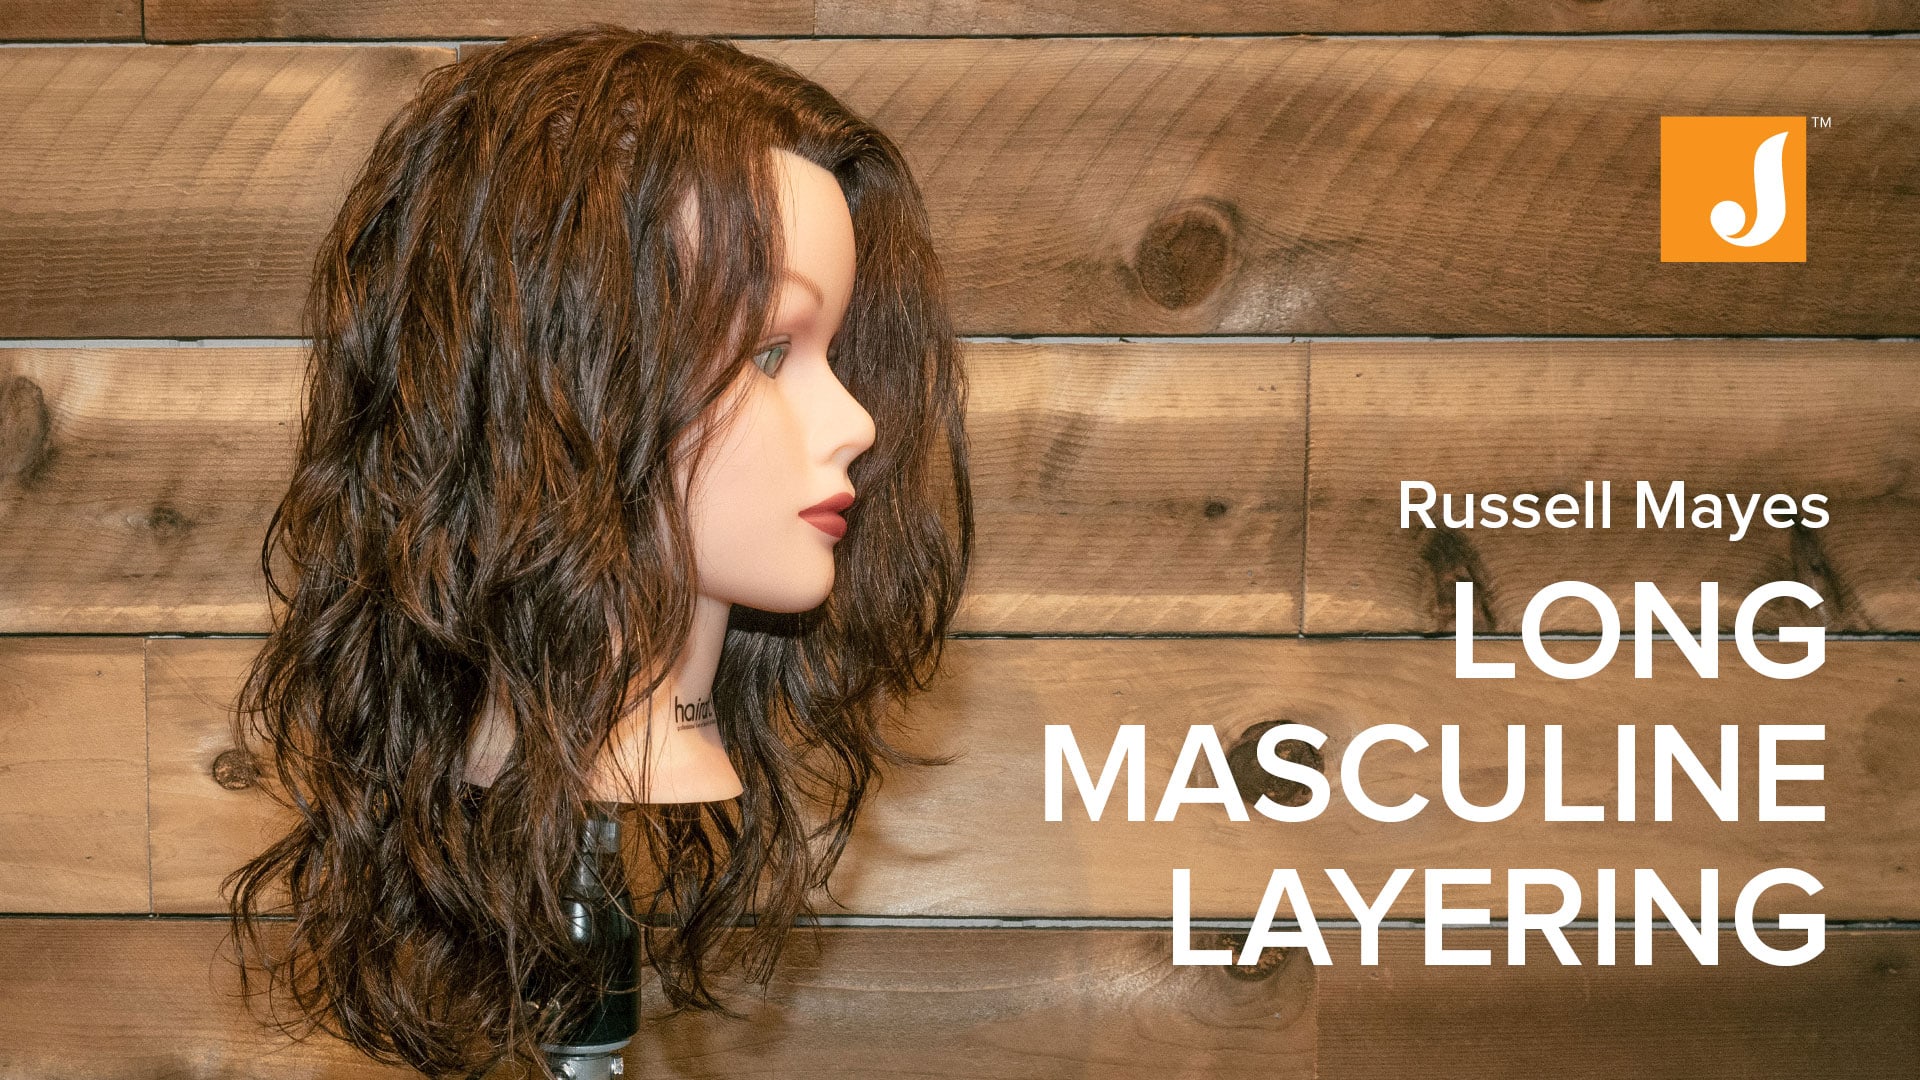 Masculine Long Hair Layering with Scissors by Russell Mayes